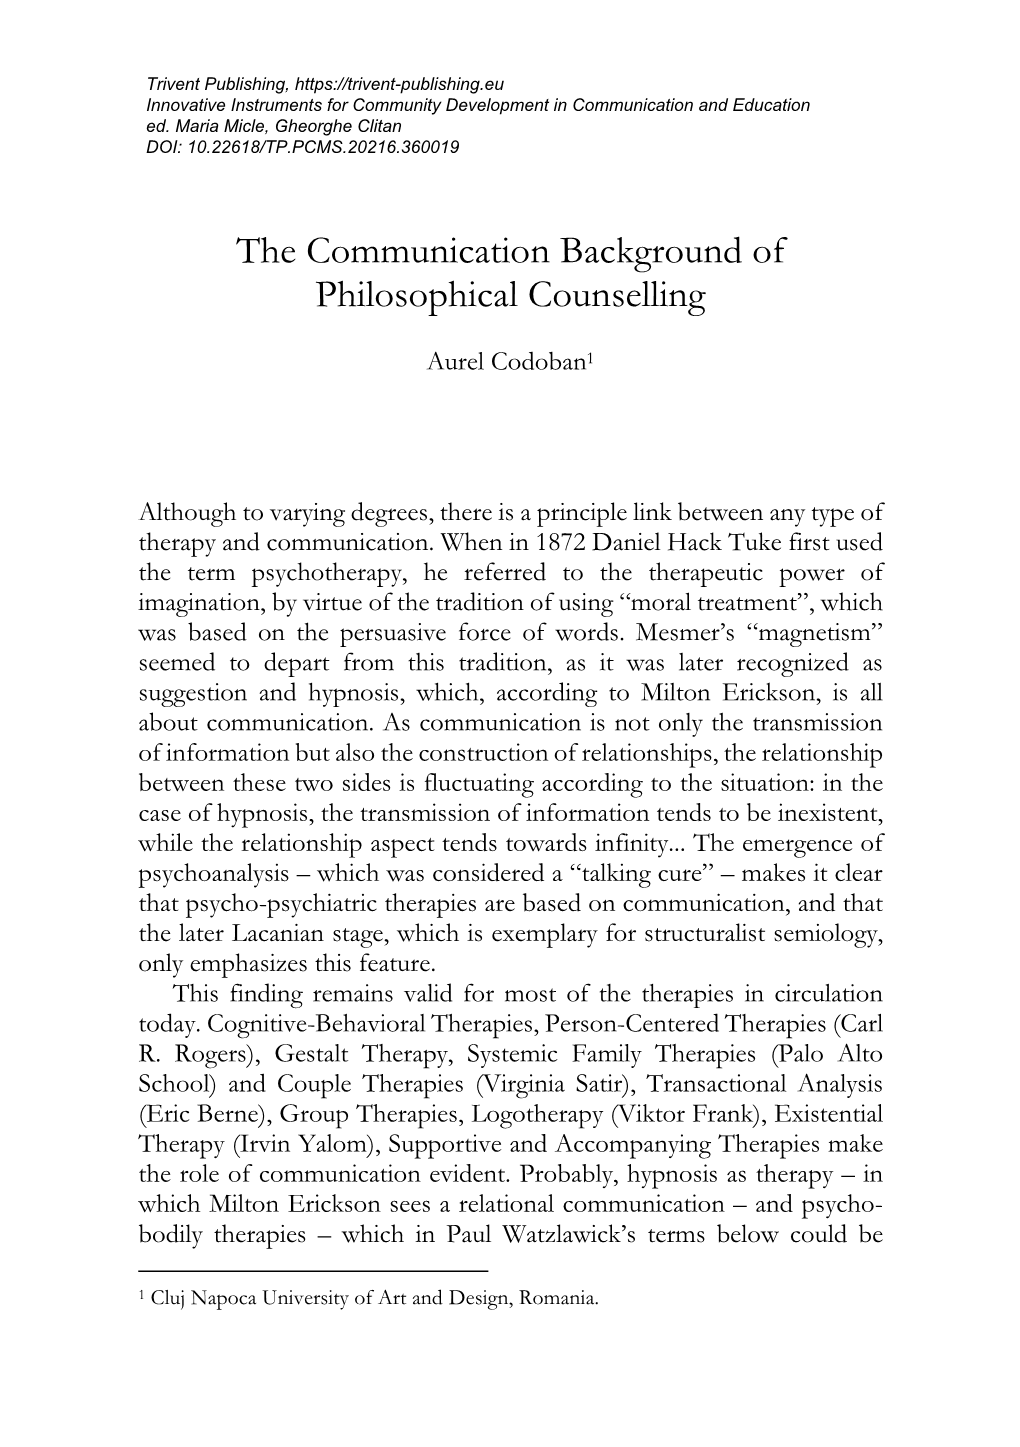 The Communication Background of Philosophical Counselling